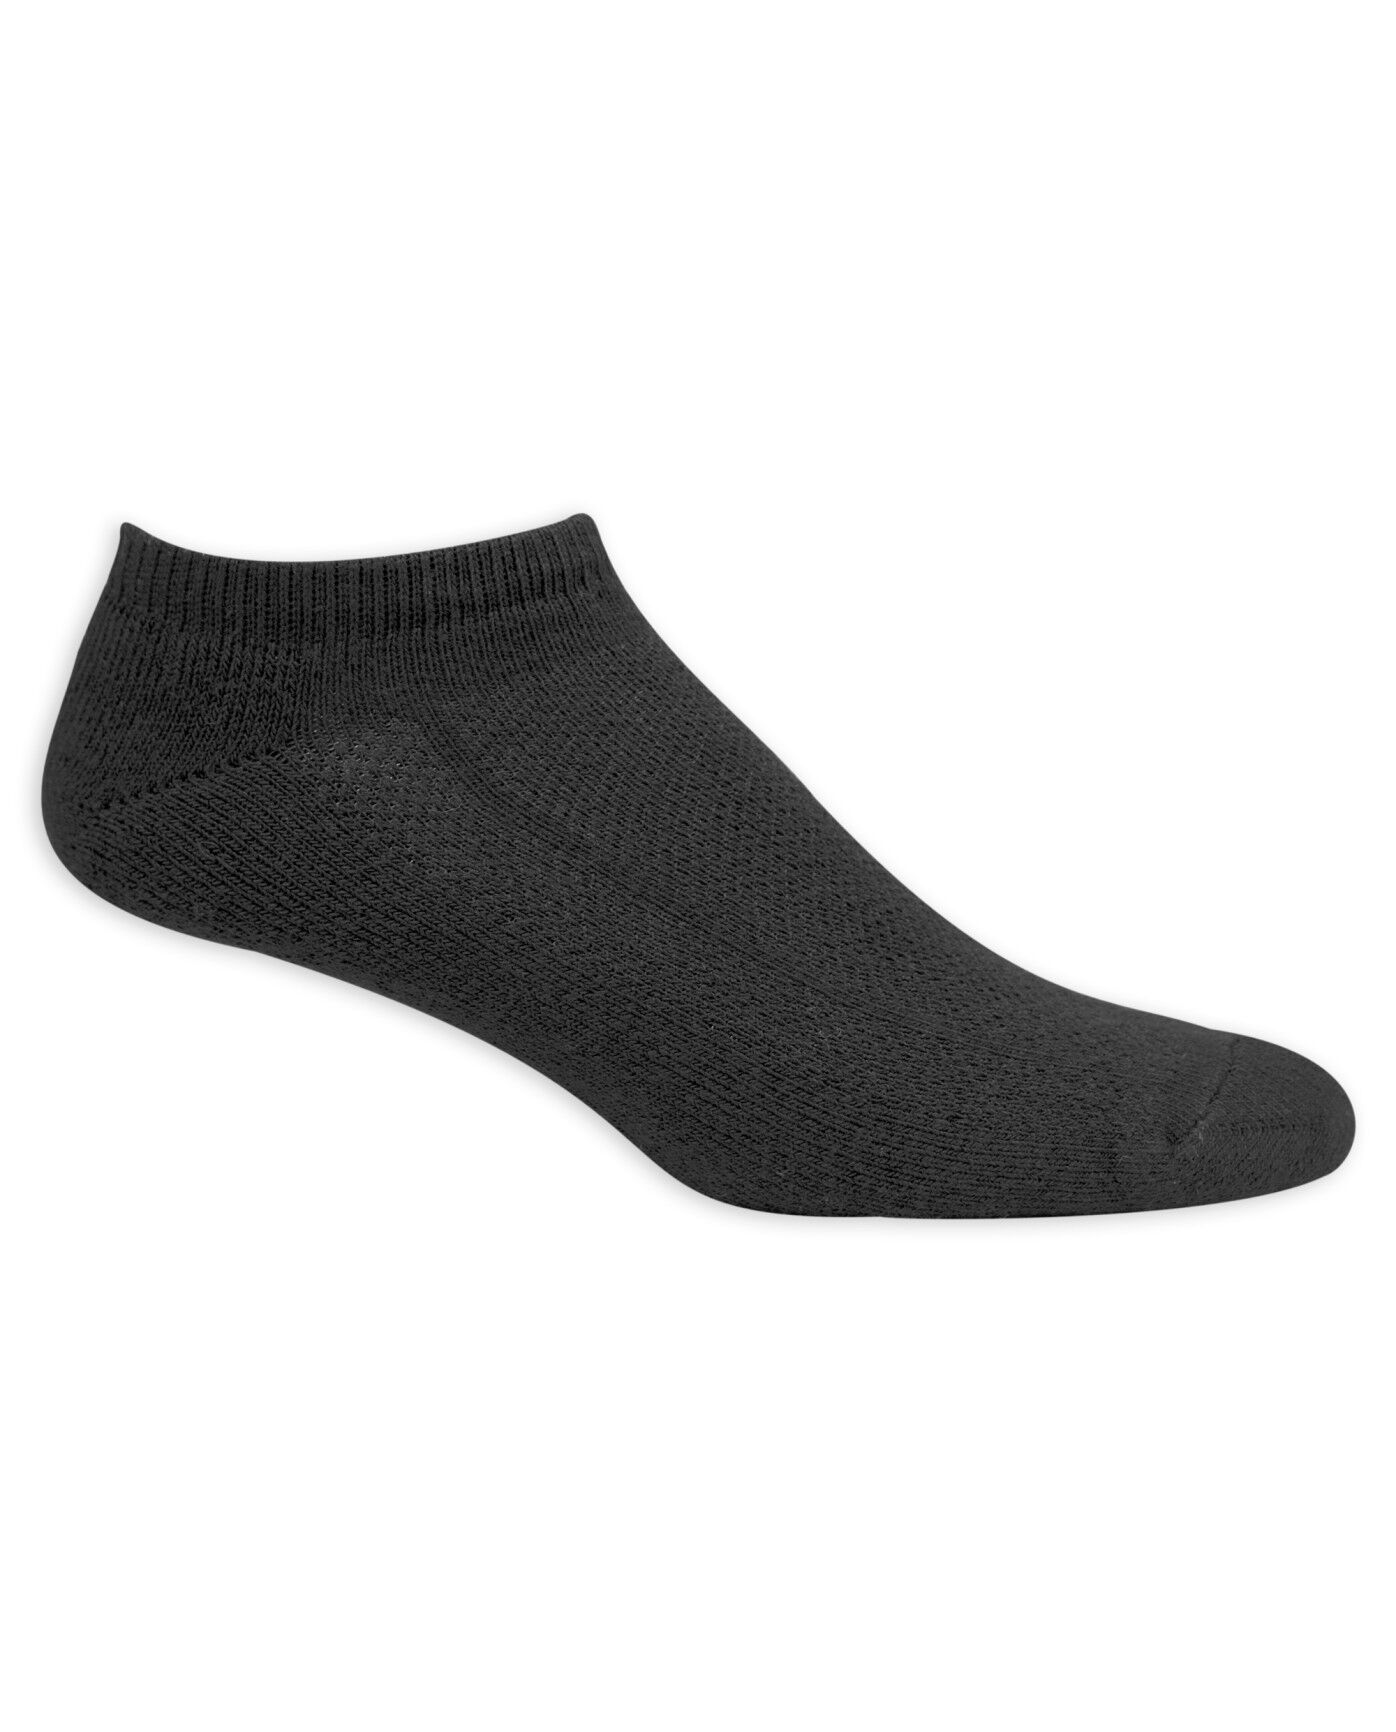 Fruit of the Loom Mens No No Show 6 Pack Sock 